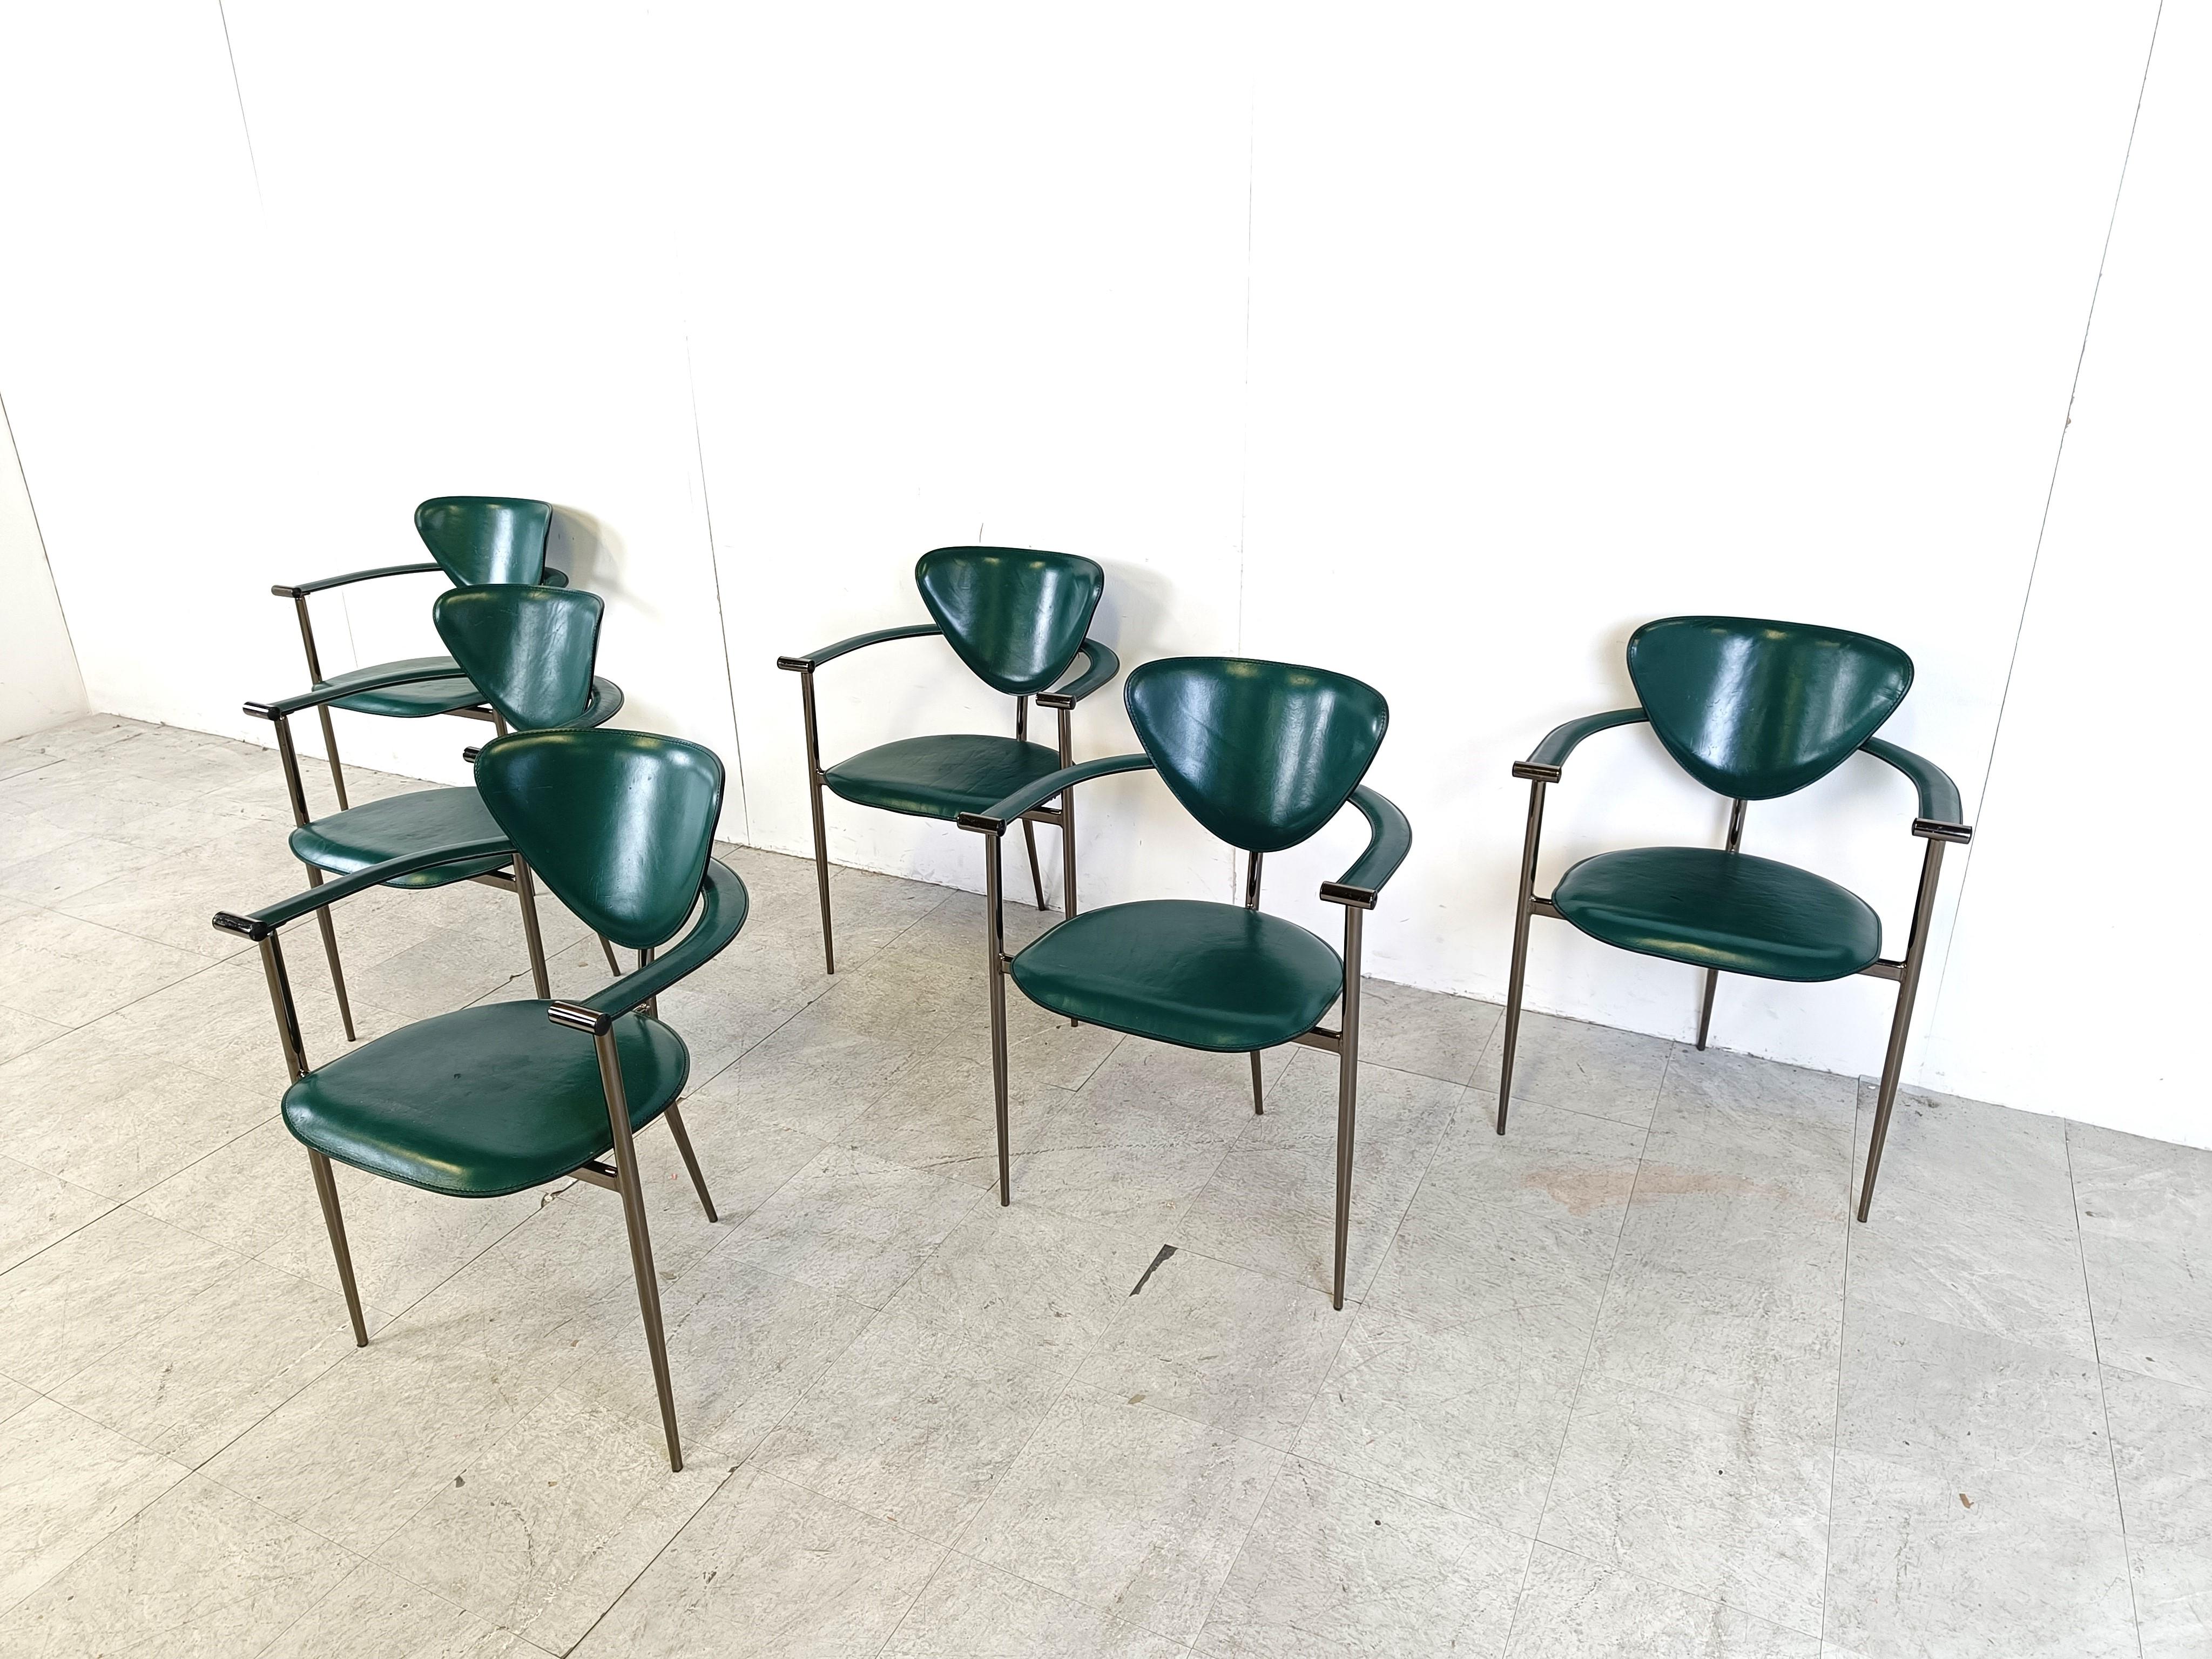 Italian Vintage green leather armchairs by Arrben Italy, 1980s - set of 6